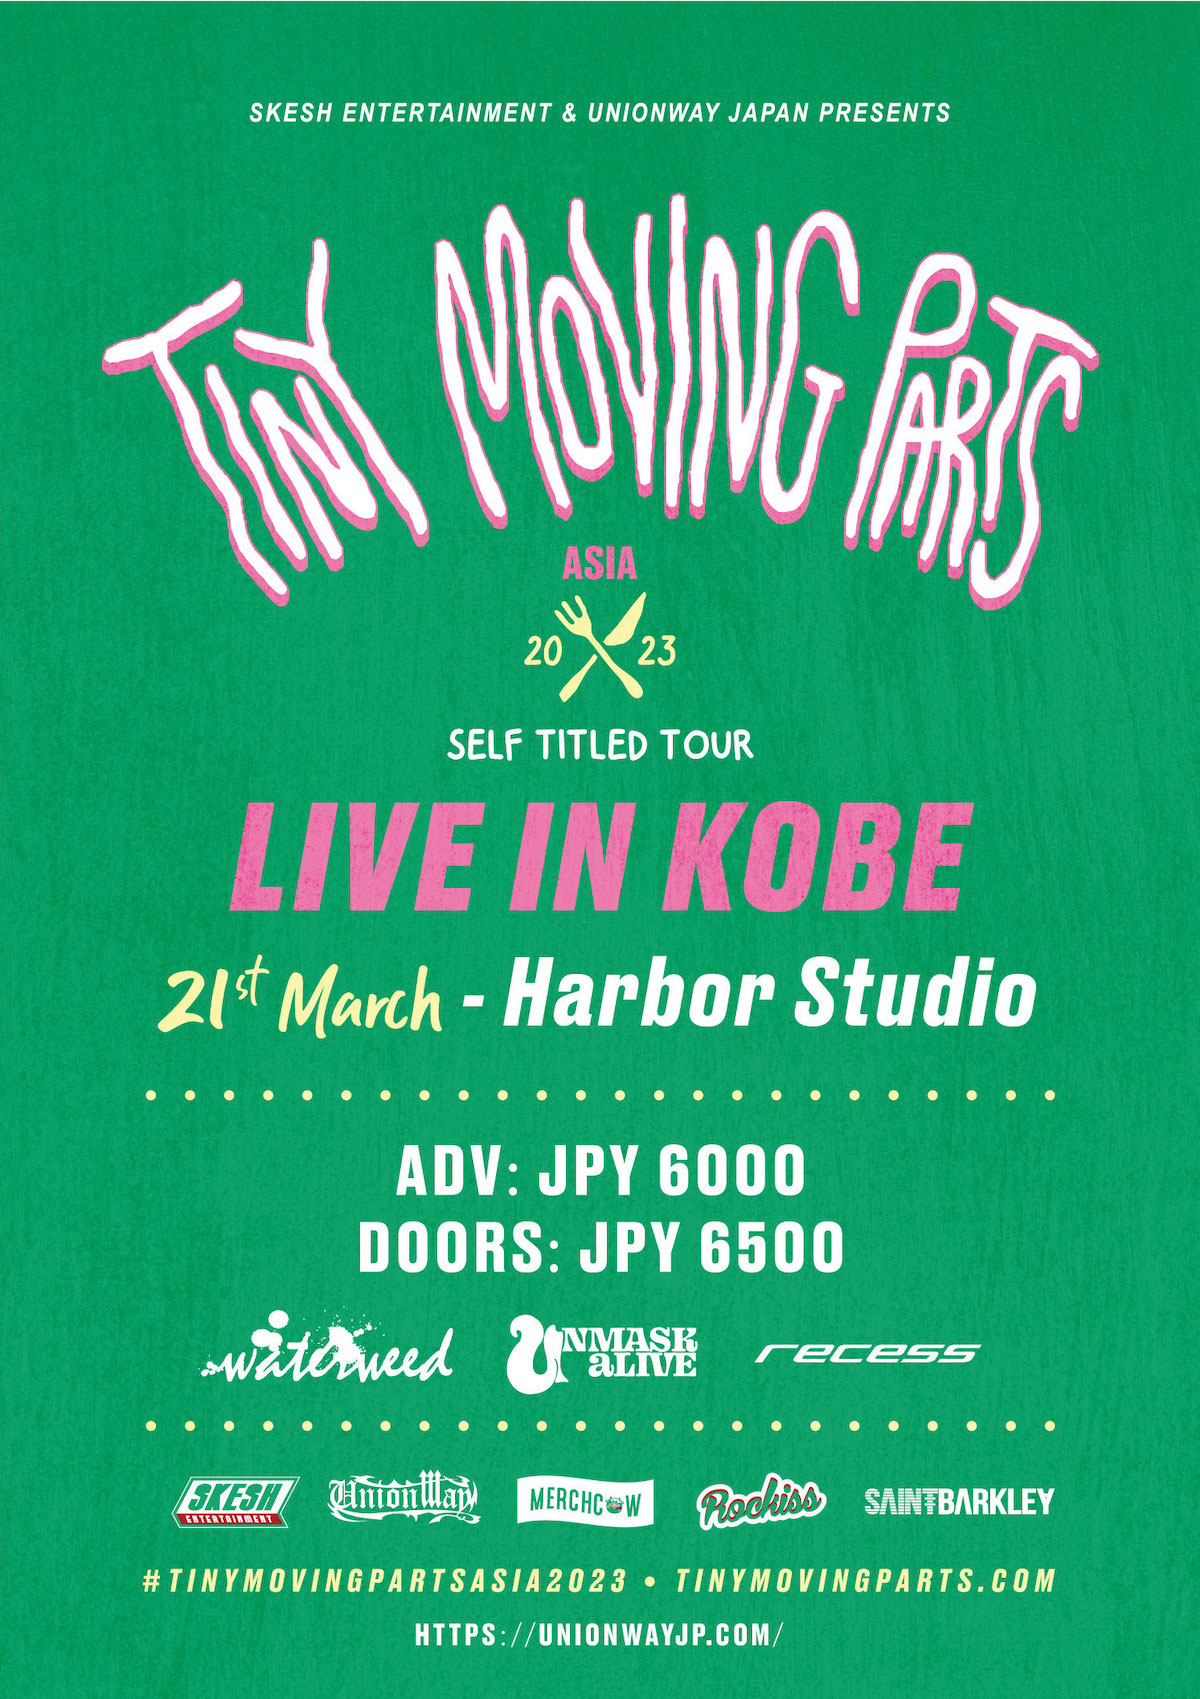 UNIONWAY presents TINY MOVING PARTS 「SELF TITLED ASIA TOUR 2023」